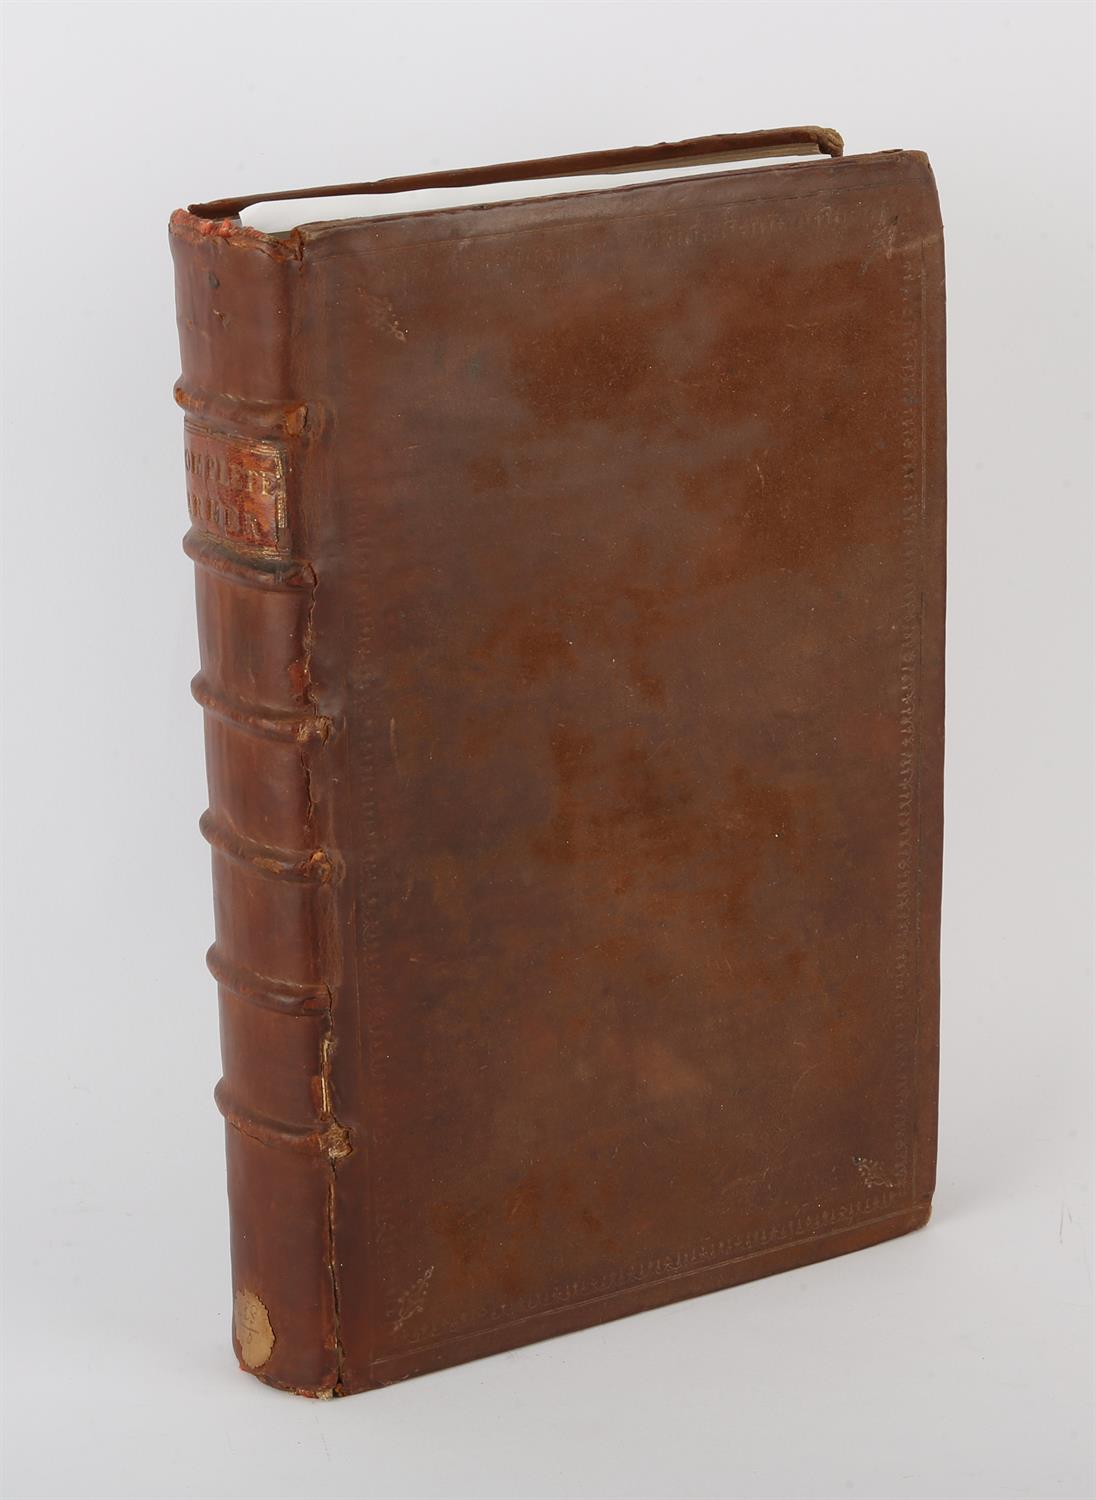 (various), 'The Complete Farmer or A General Dictionary of Husbandry', London, 1766, first edition,